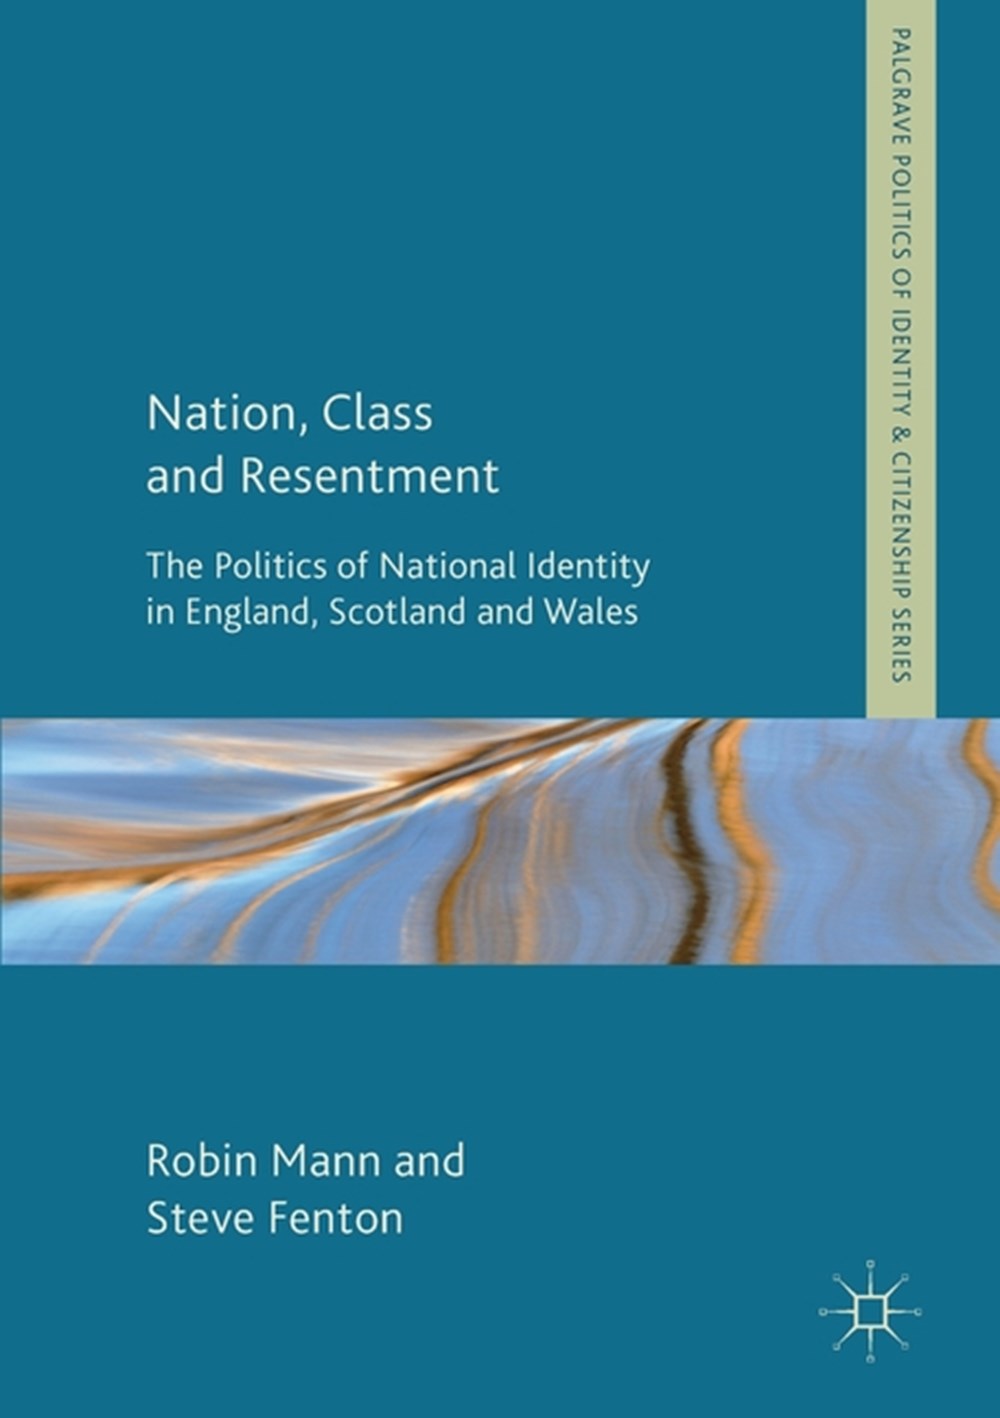 Nation, Class and Resentment: The Politics of National Identity in England, Scotland and Wales (2017